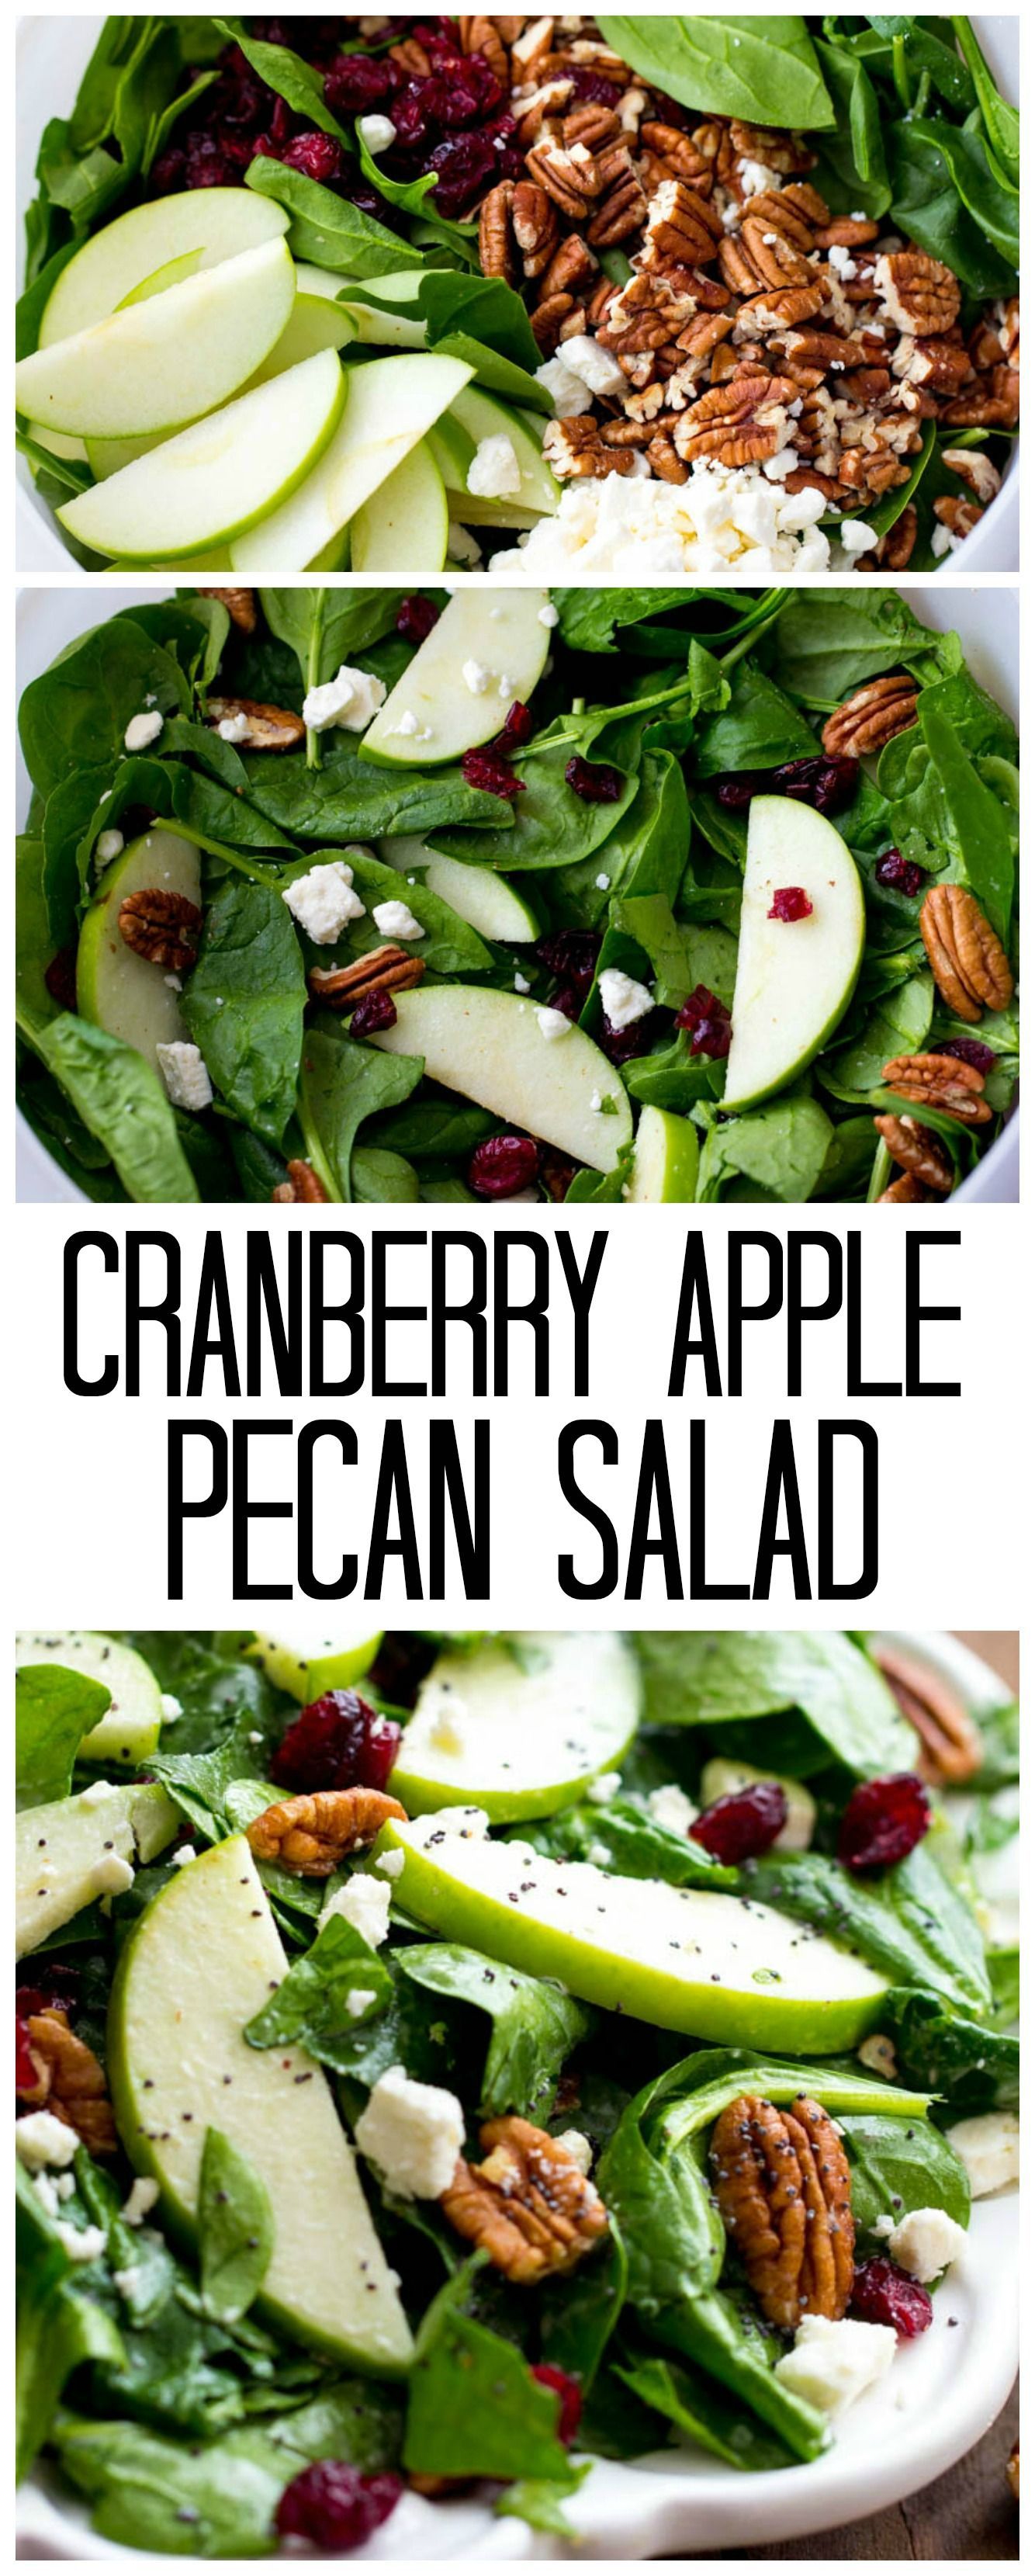 This Cranberry Apple Pecan Salad is perfect for the holidays and has so many amazing flavors! The creamy poppyseed dressing is the